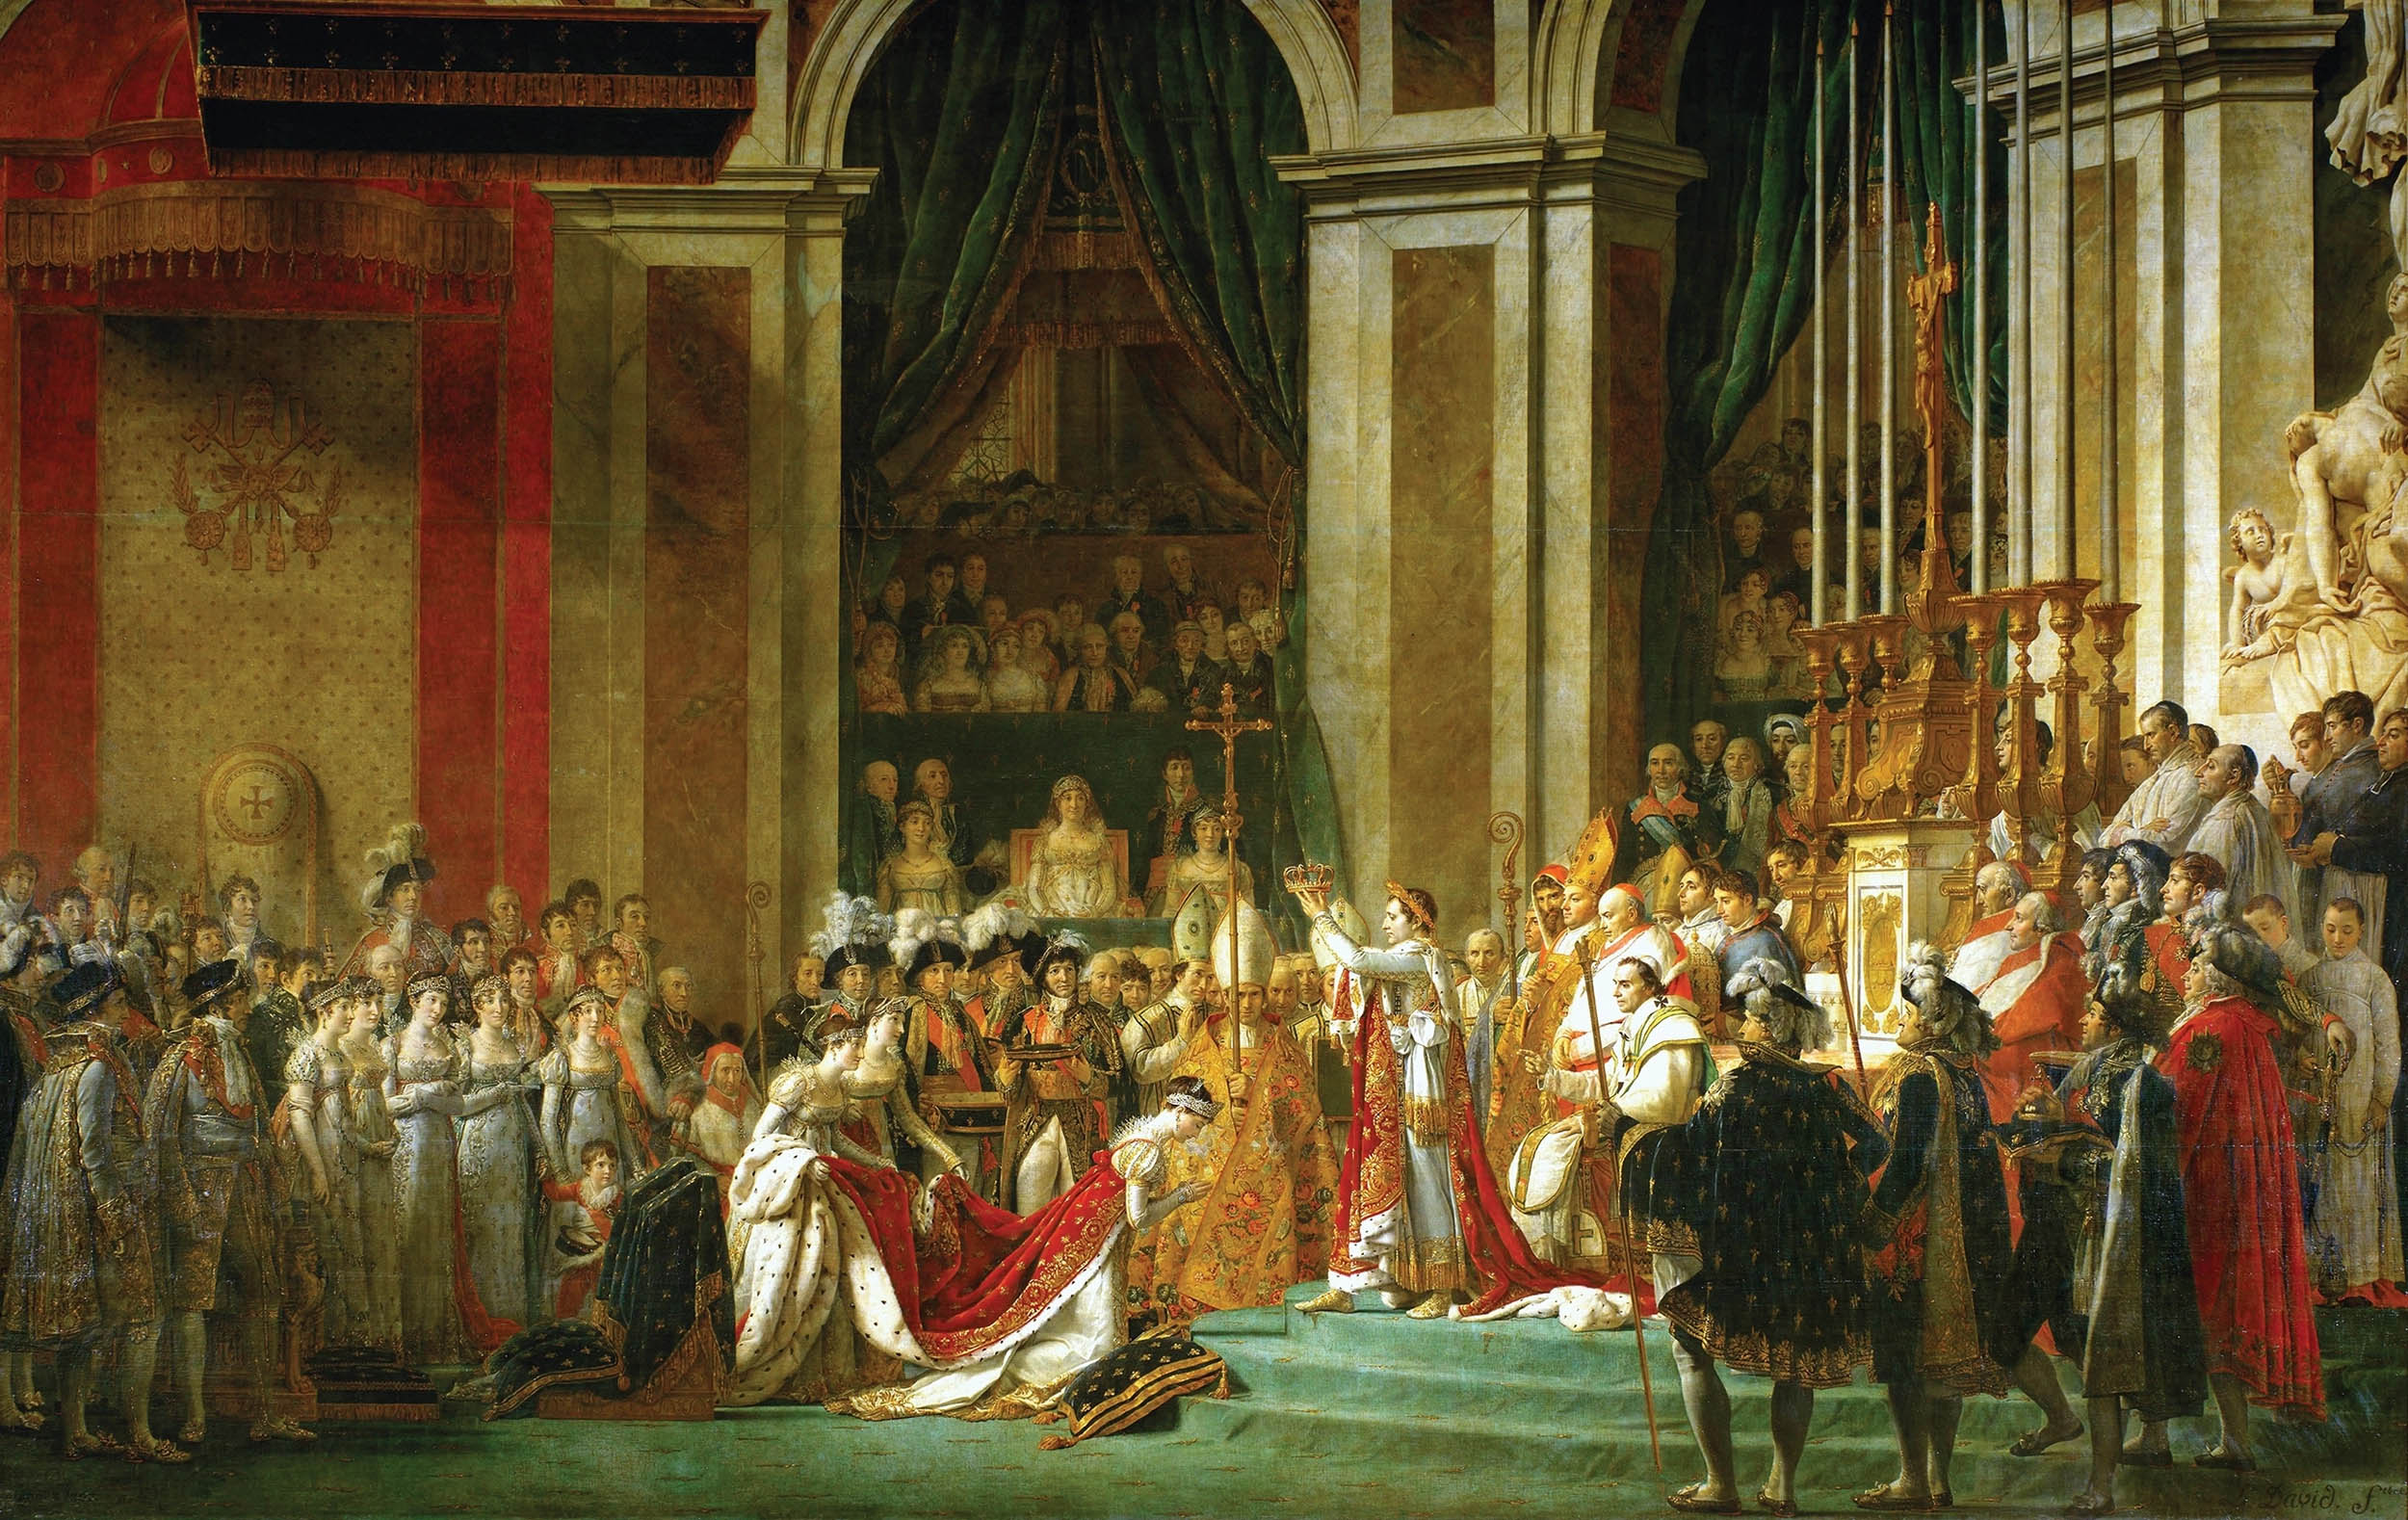 Coronation of Emperor Napoleon I and Coronation of the Empress Josephine in Notre-Dame de Paris, December 2, 1804, by Jacques-Louis David and Georges Rouget, ca. 1805–1807, oil on canvas (Louvre Museum)